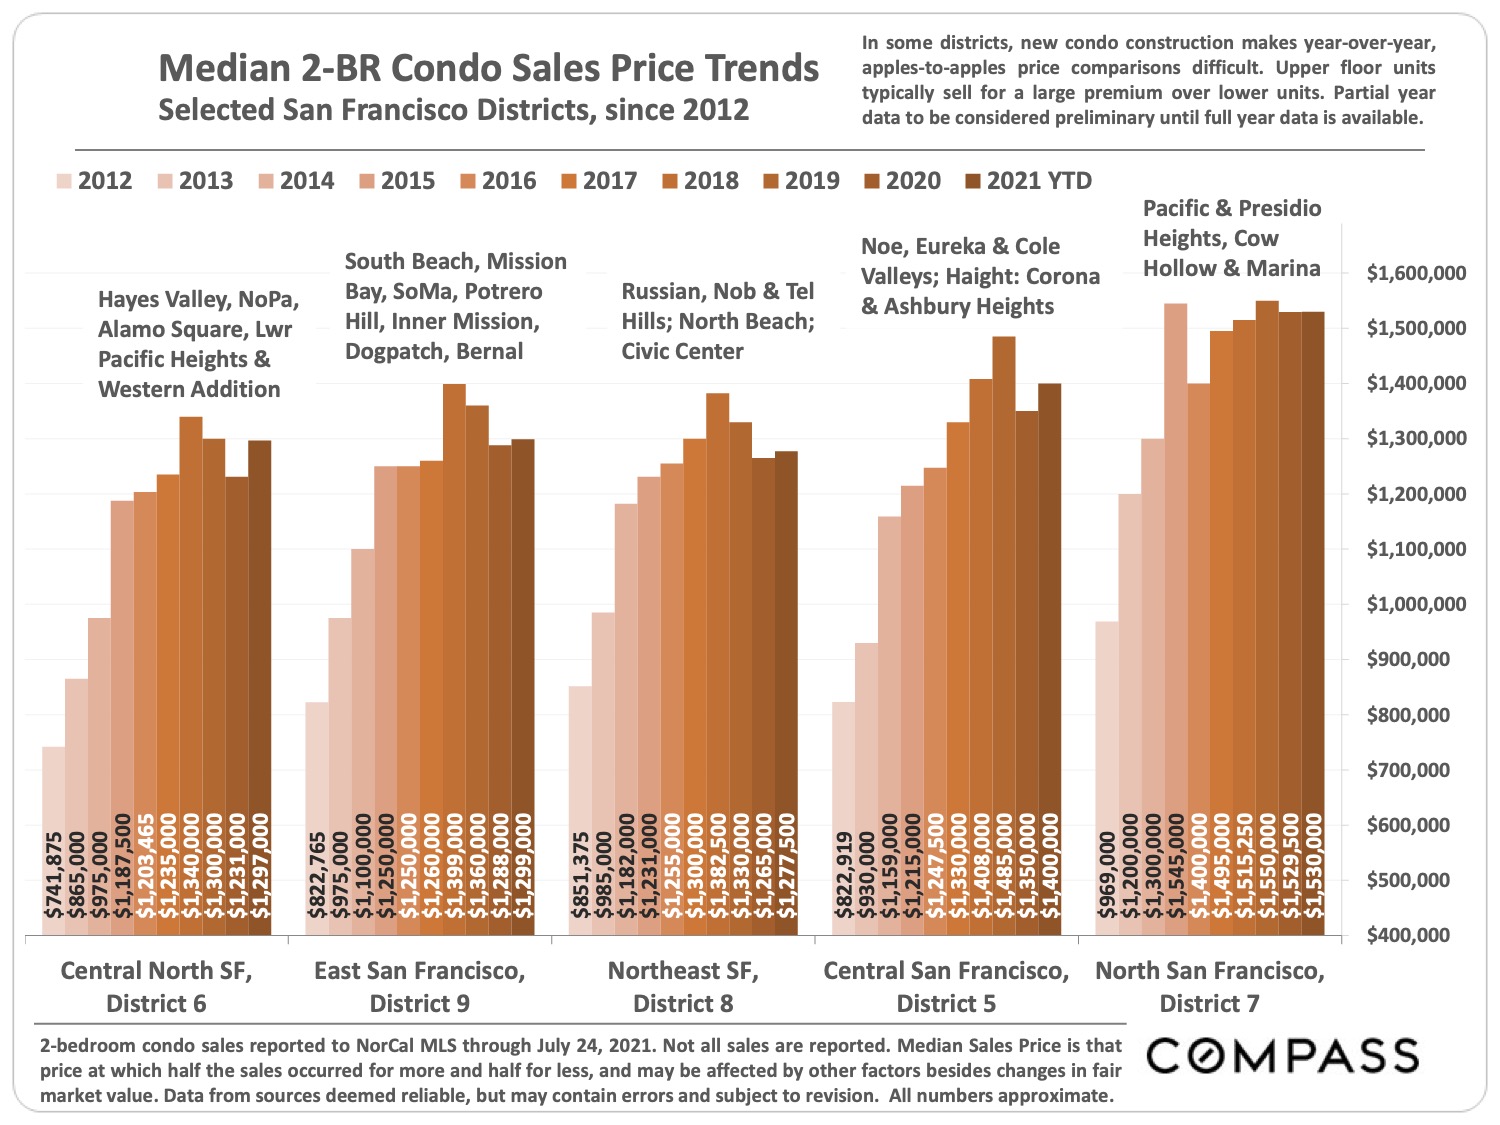 Image of Median 2BR Condo Sales Price Trends Selected San Francisco Districts since 2012